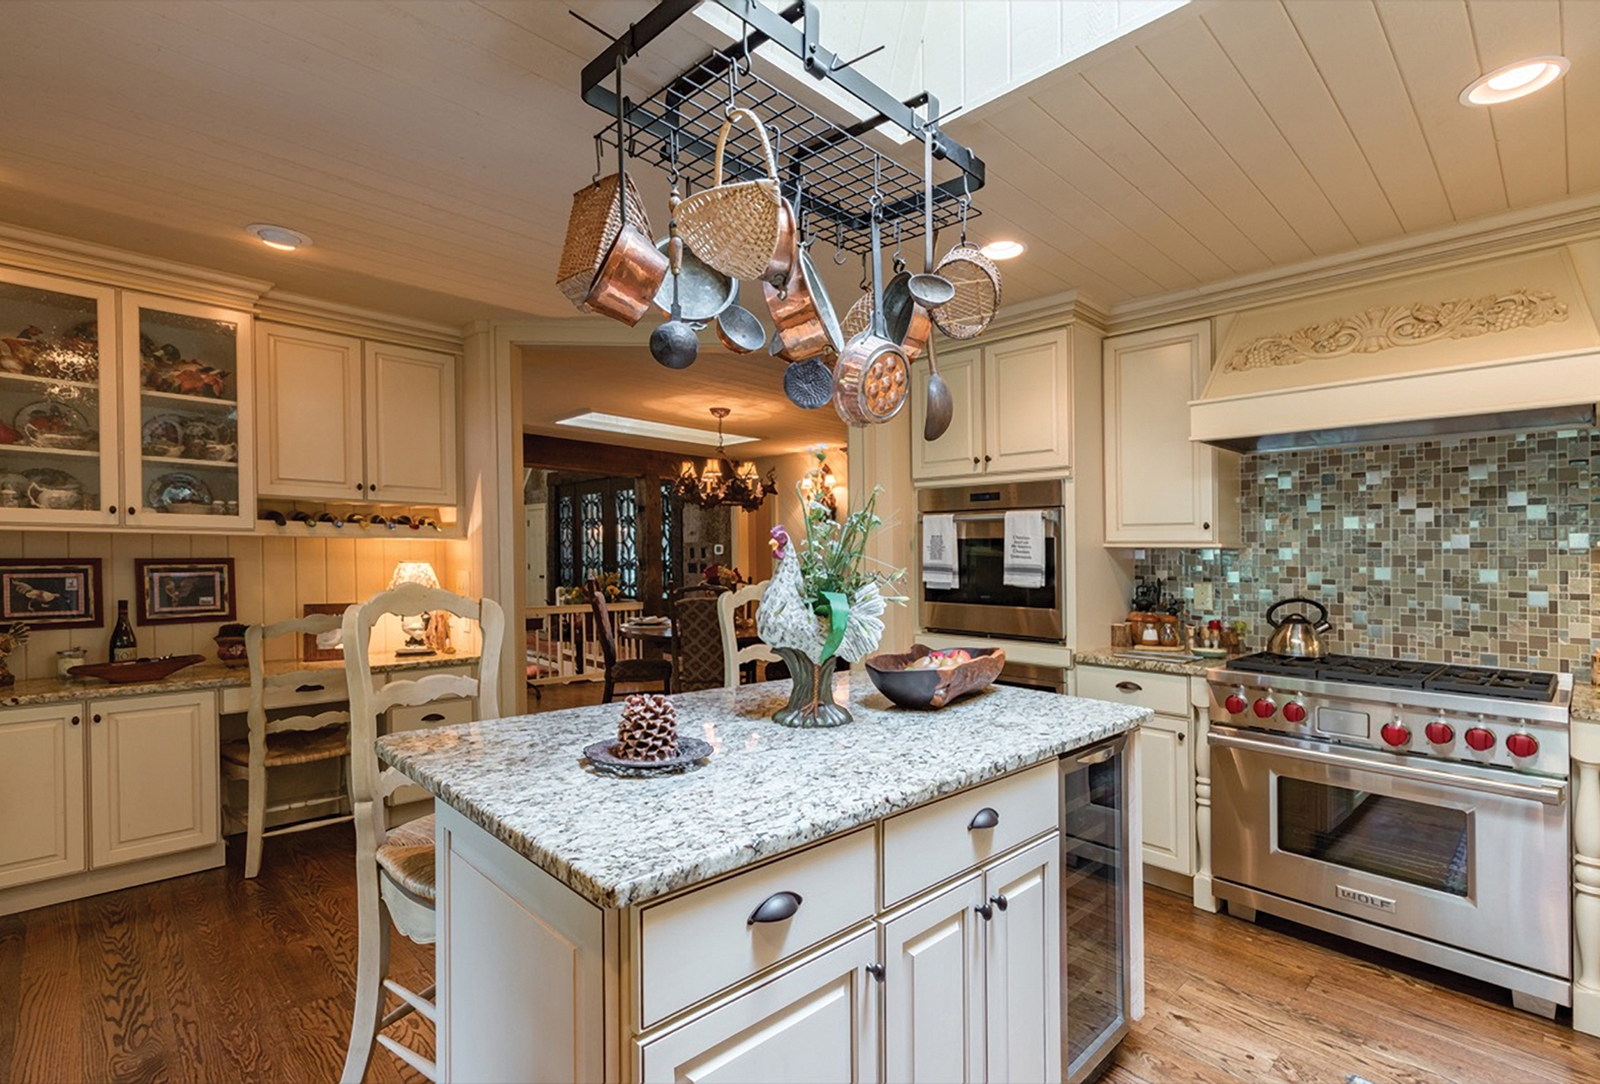 Home for Sale in Sapphire Valley, NC - Kitchen